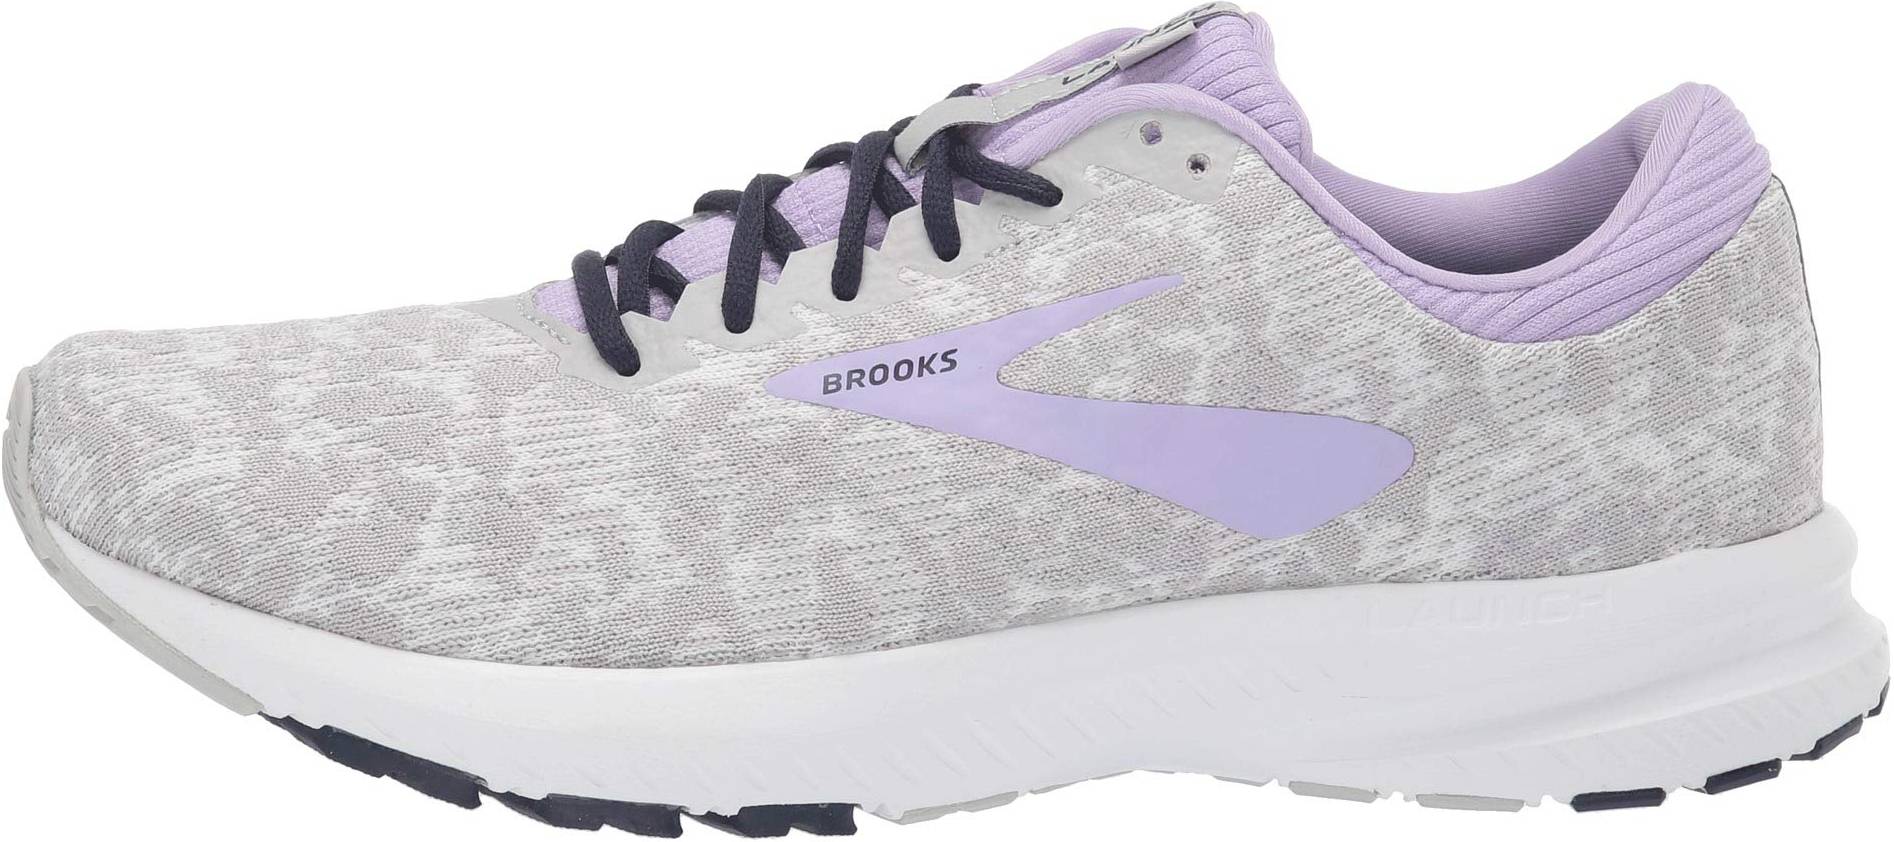 Save 18% on Narrow Brooks Running Shoes 